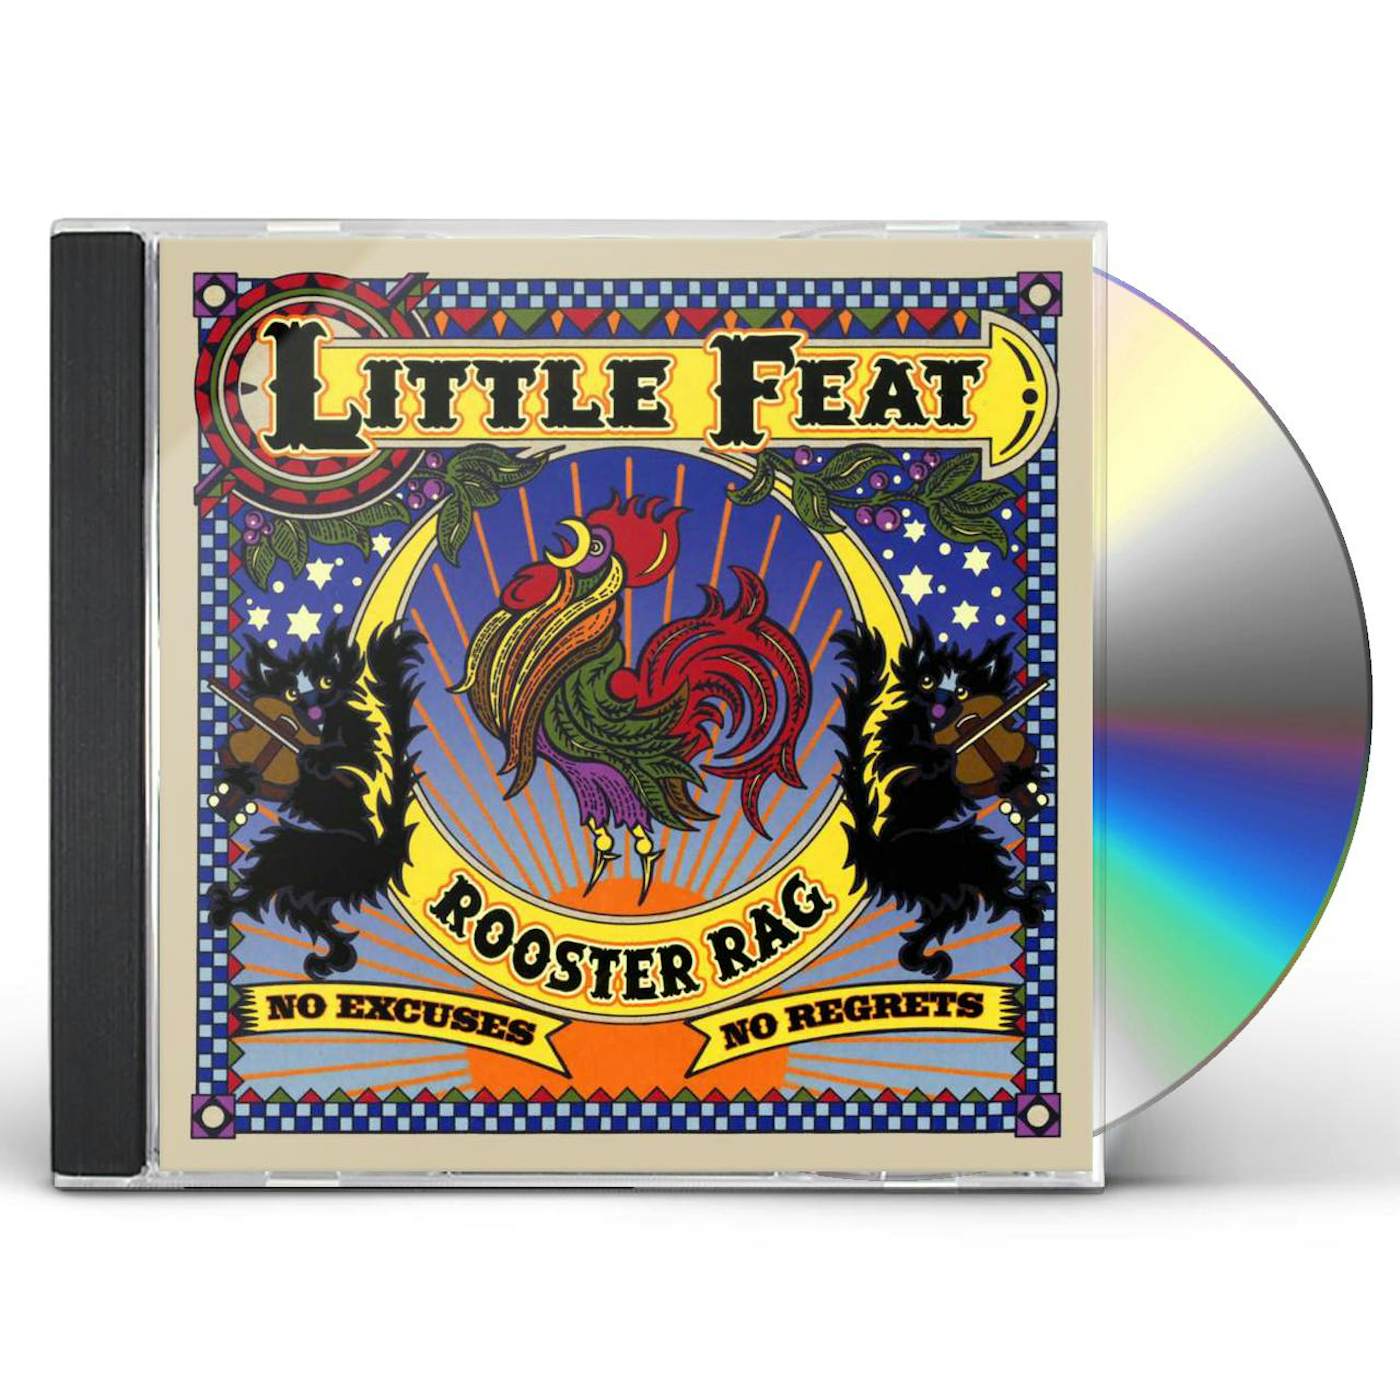 Little Feat ROOSTER RAG CD